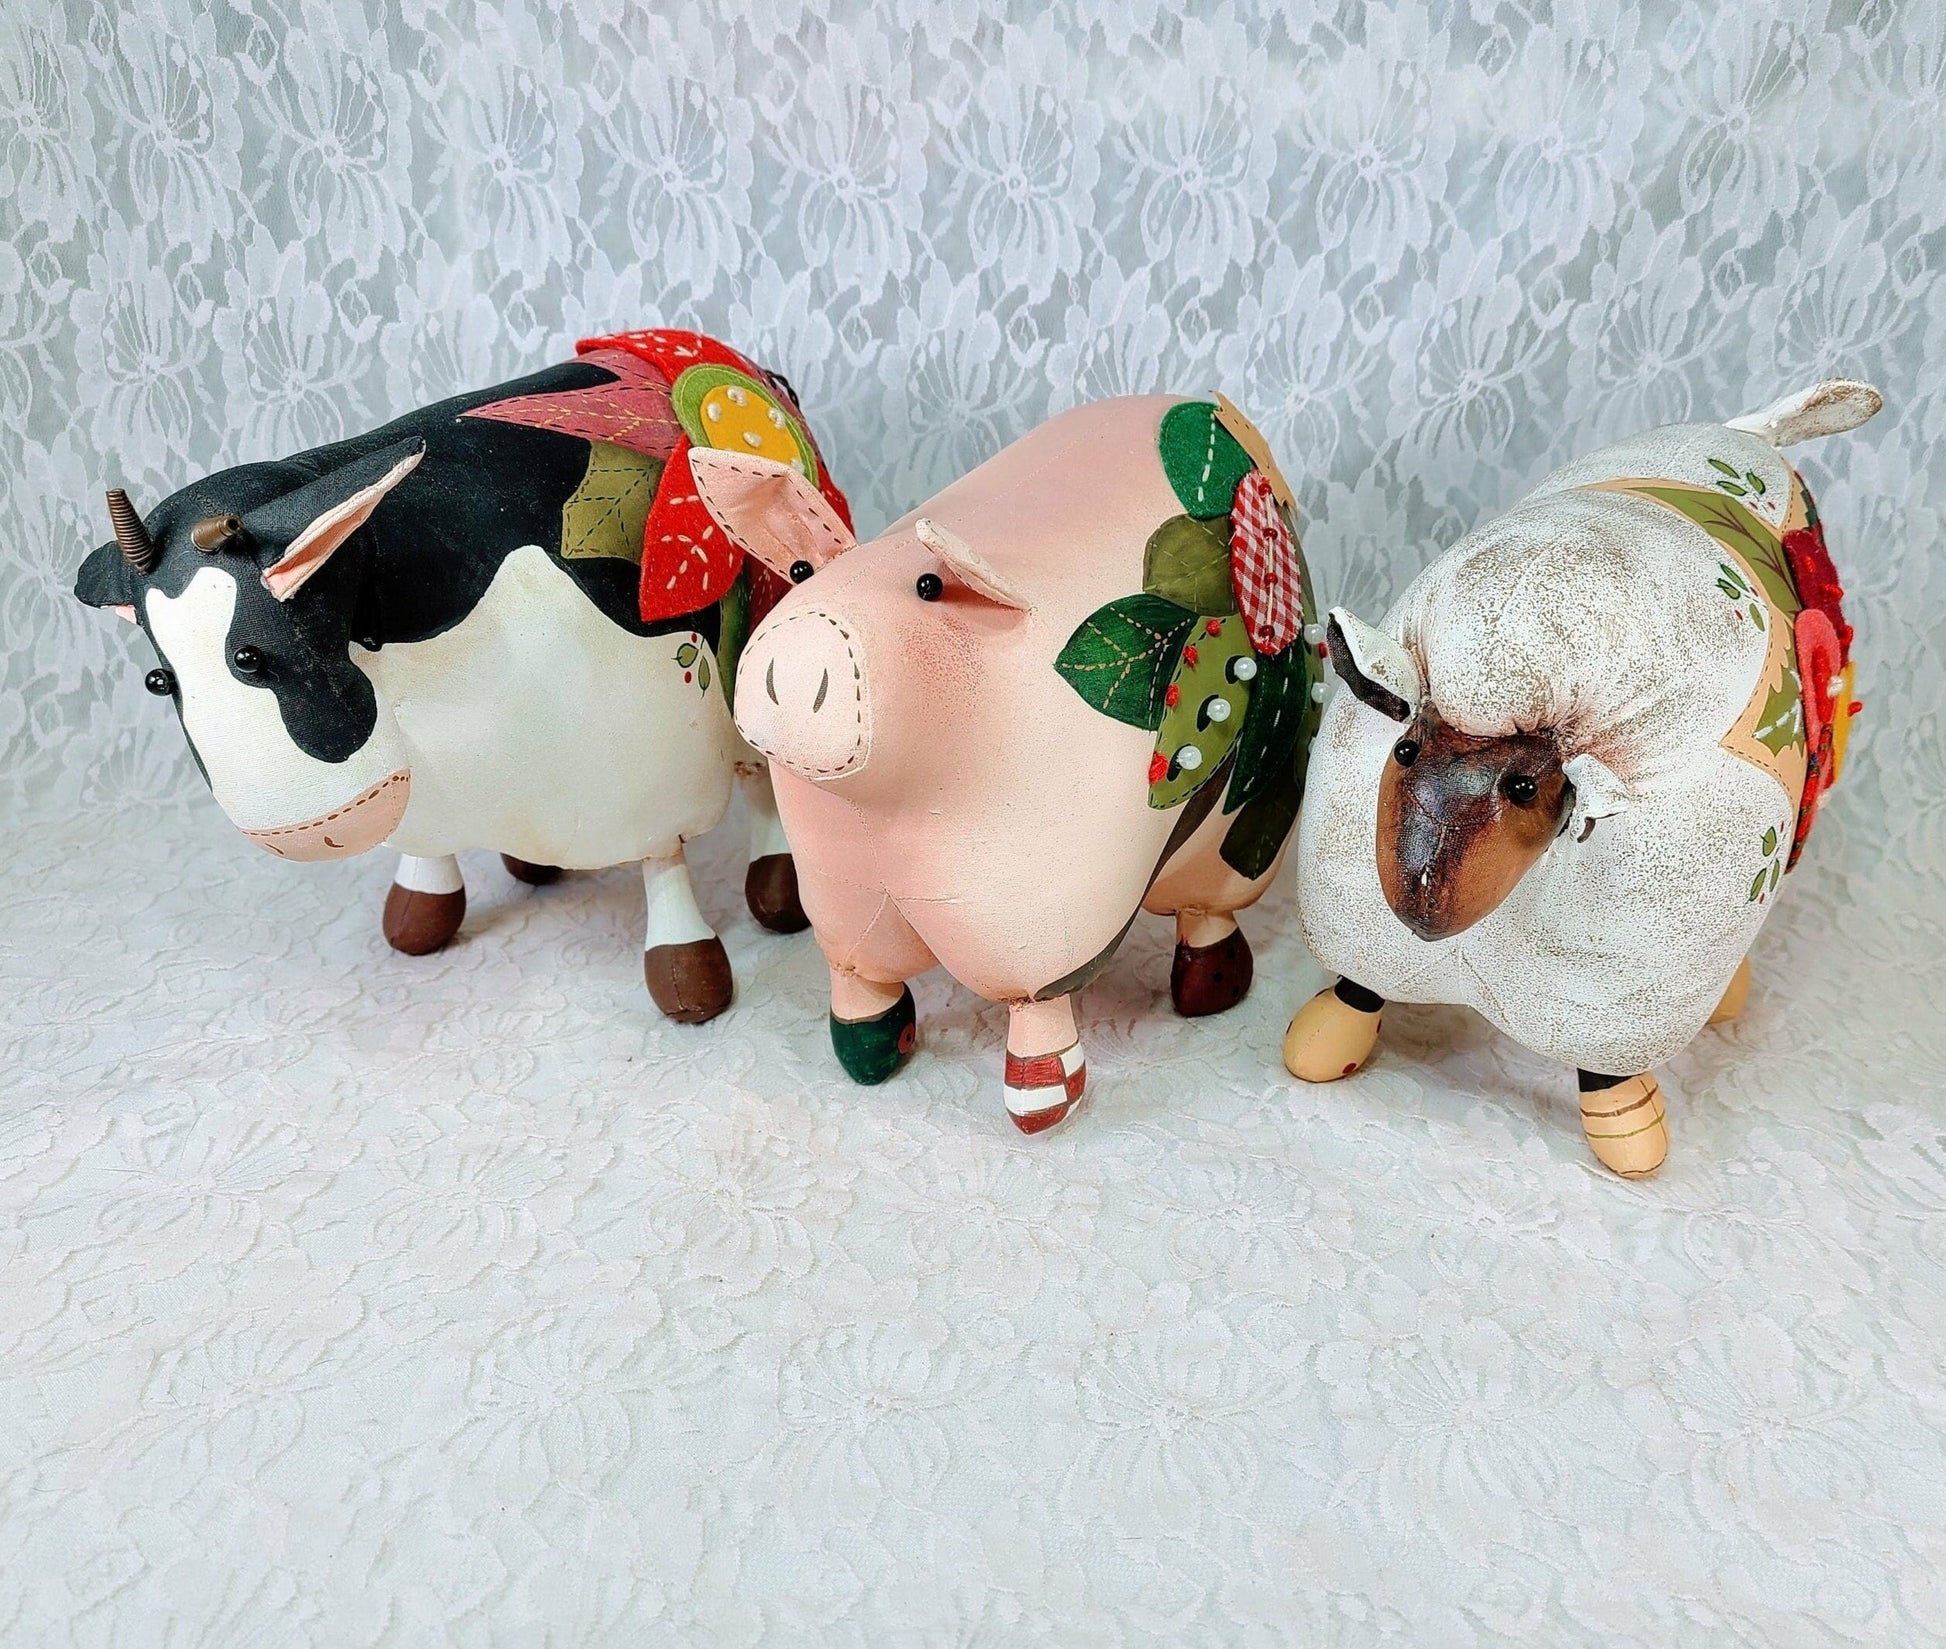 Set of Three (3) Handmade Primitive Oil Cloth Barn Animals ~ Cow, Pig, and Sheep ~ Painted Oilcloth Fabric Textile Rustic Décor 